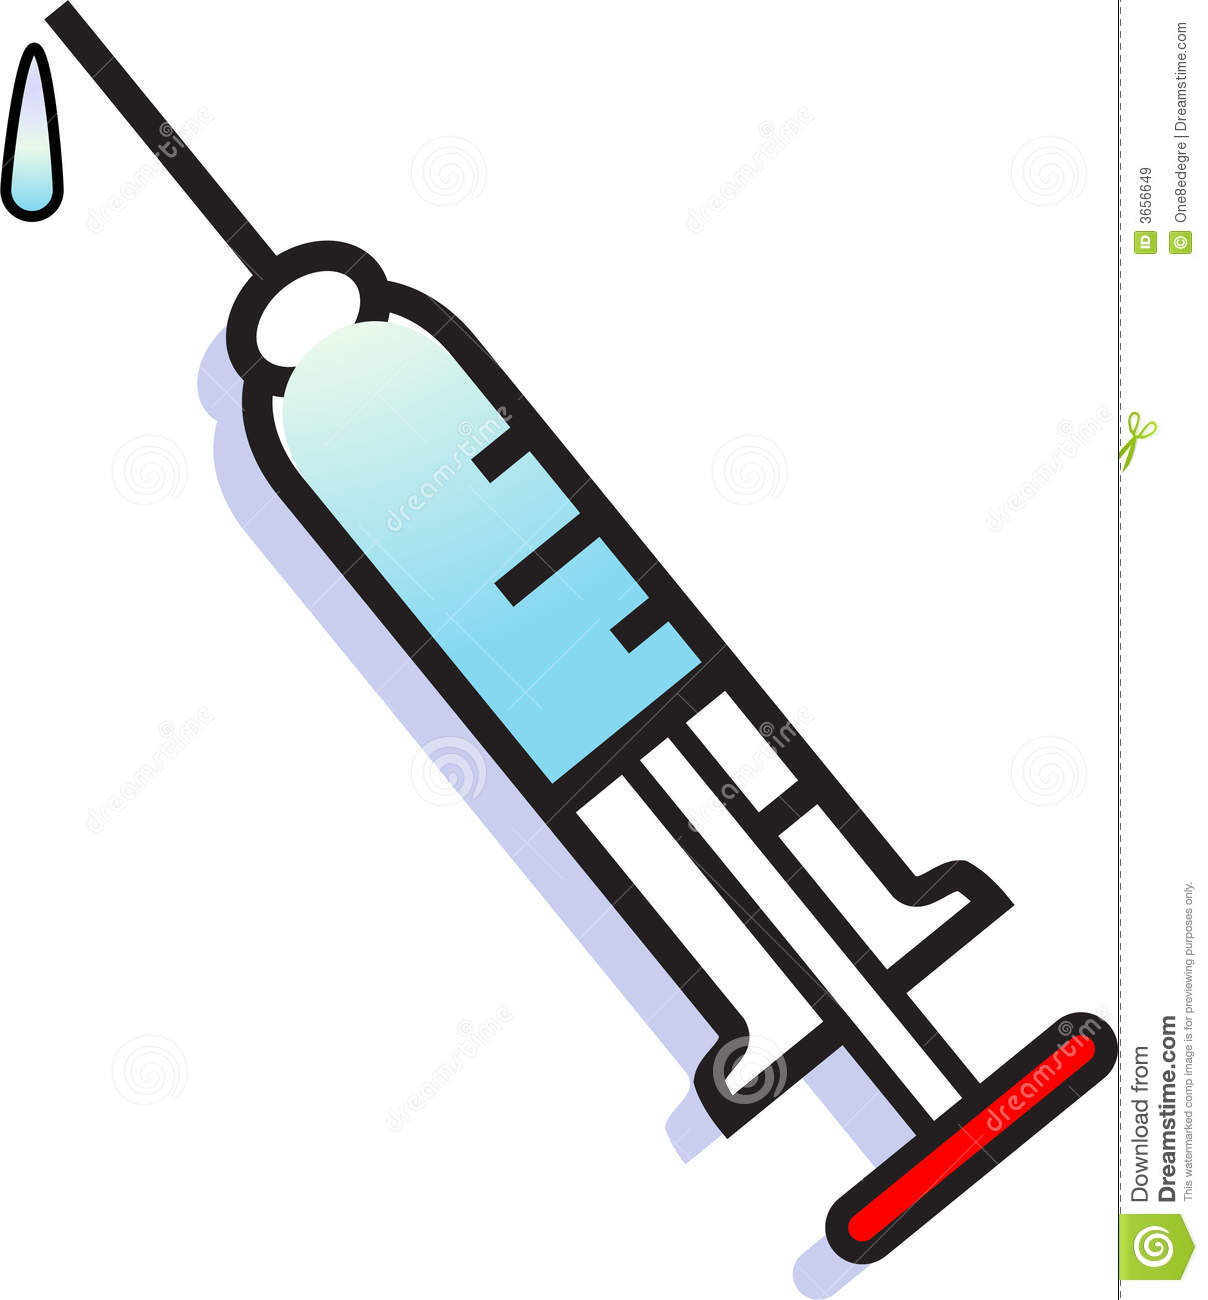 Syringe 20clipart   Clipart Panda   Free Clipart Images